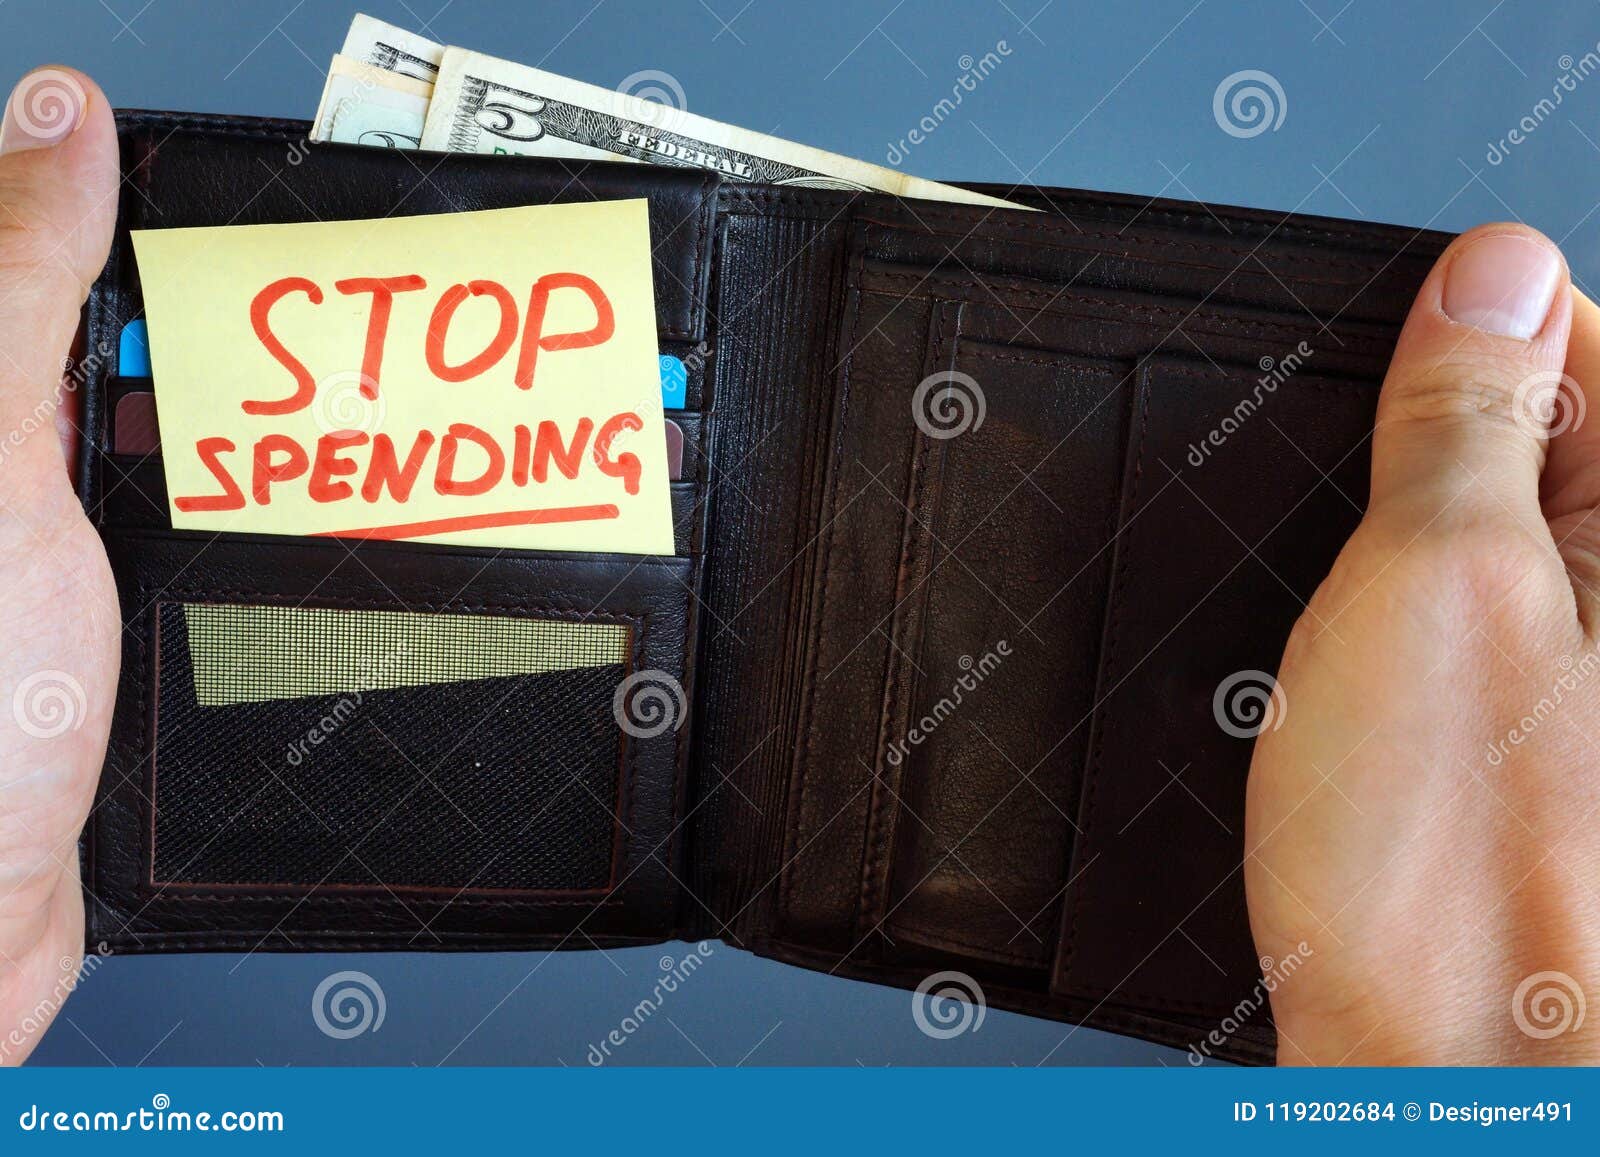 hands holding wallet with stick stop spending.